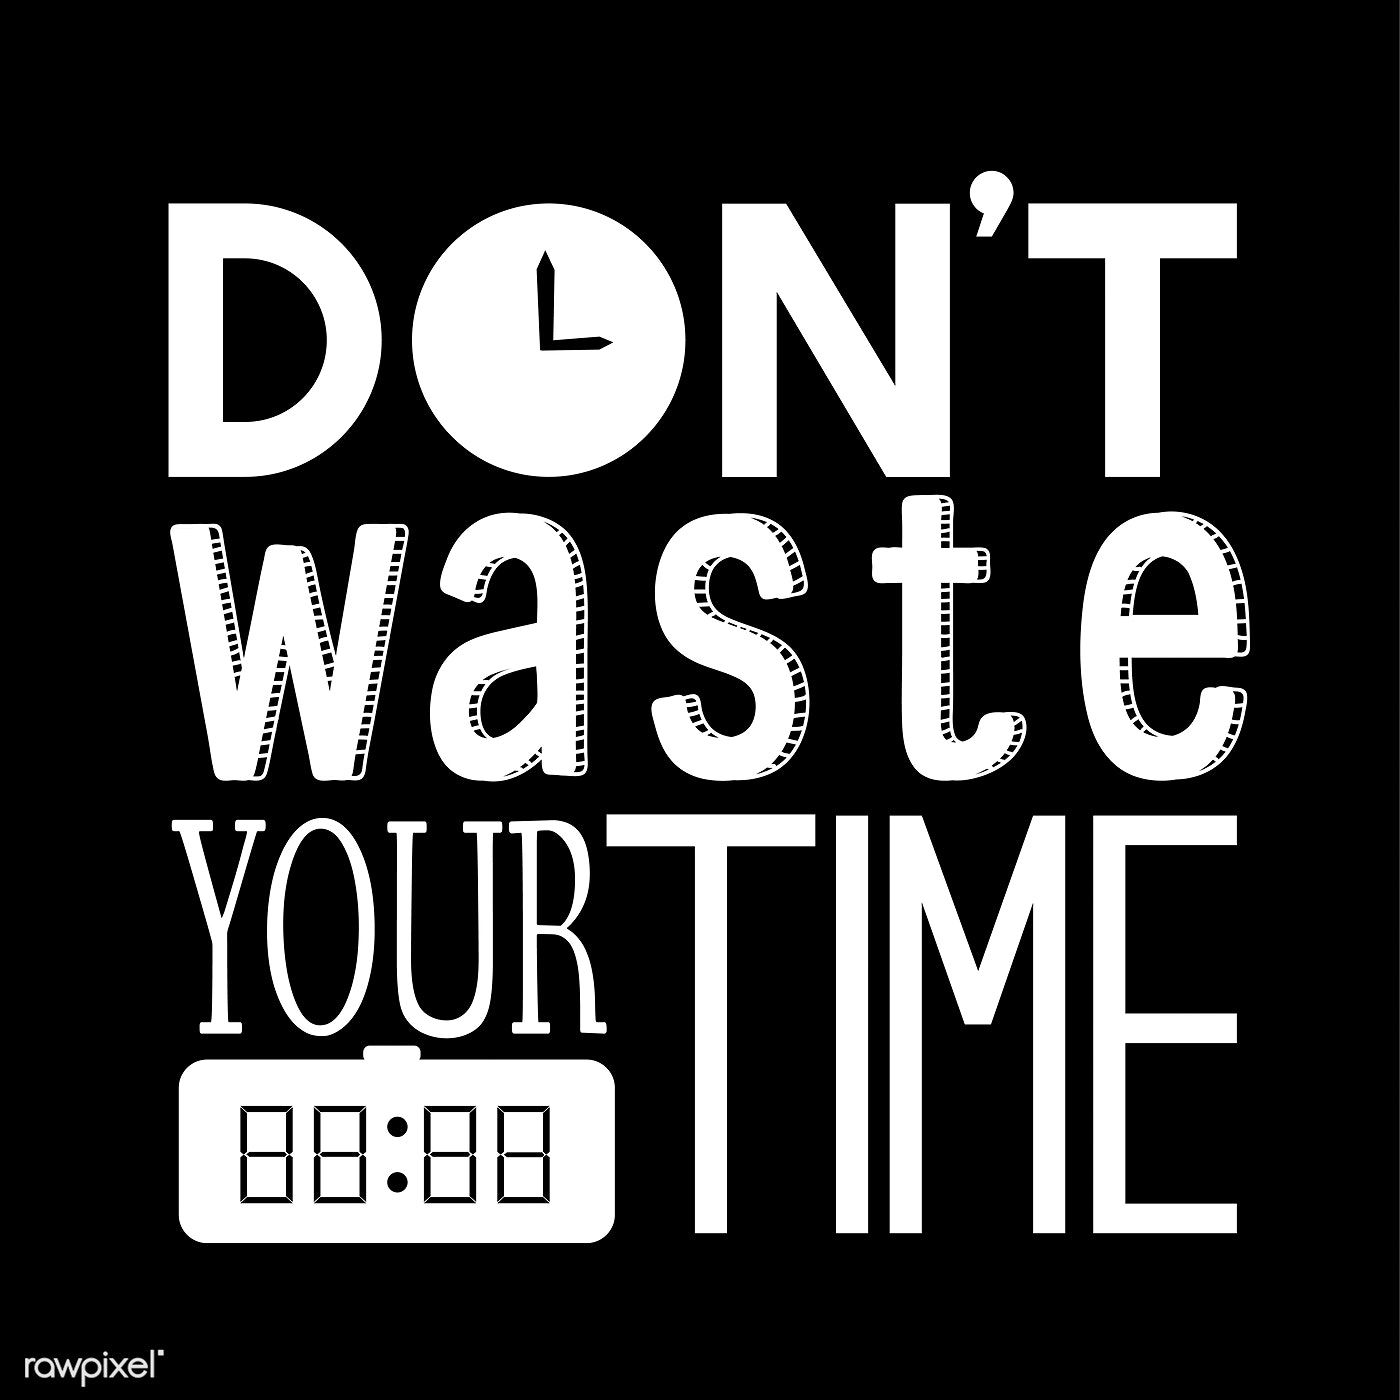 Don't waste your time typography design quote / busbus. Typography design quotes, Typography design, Design quotes